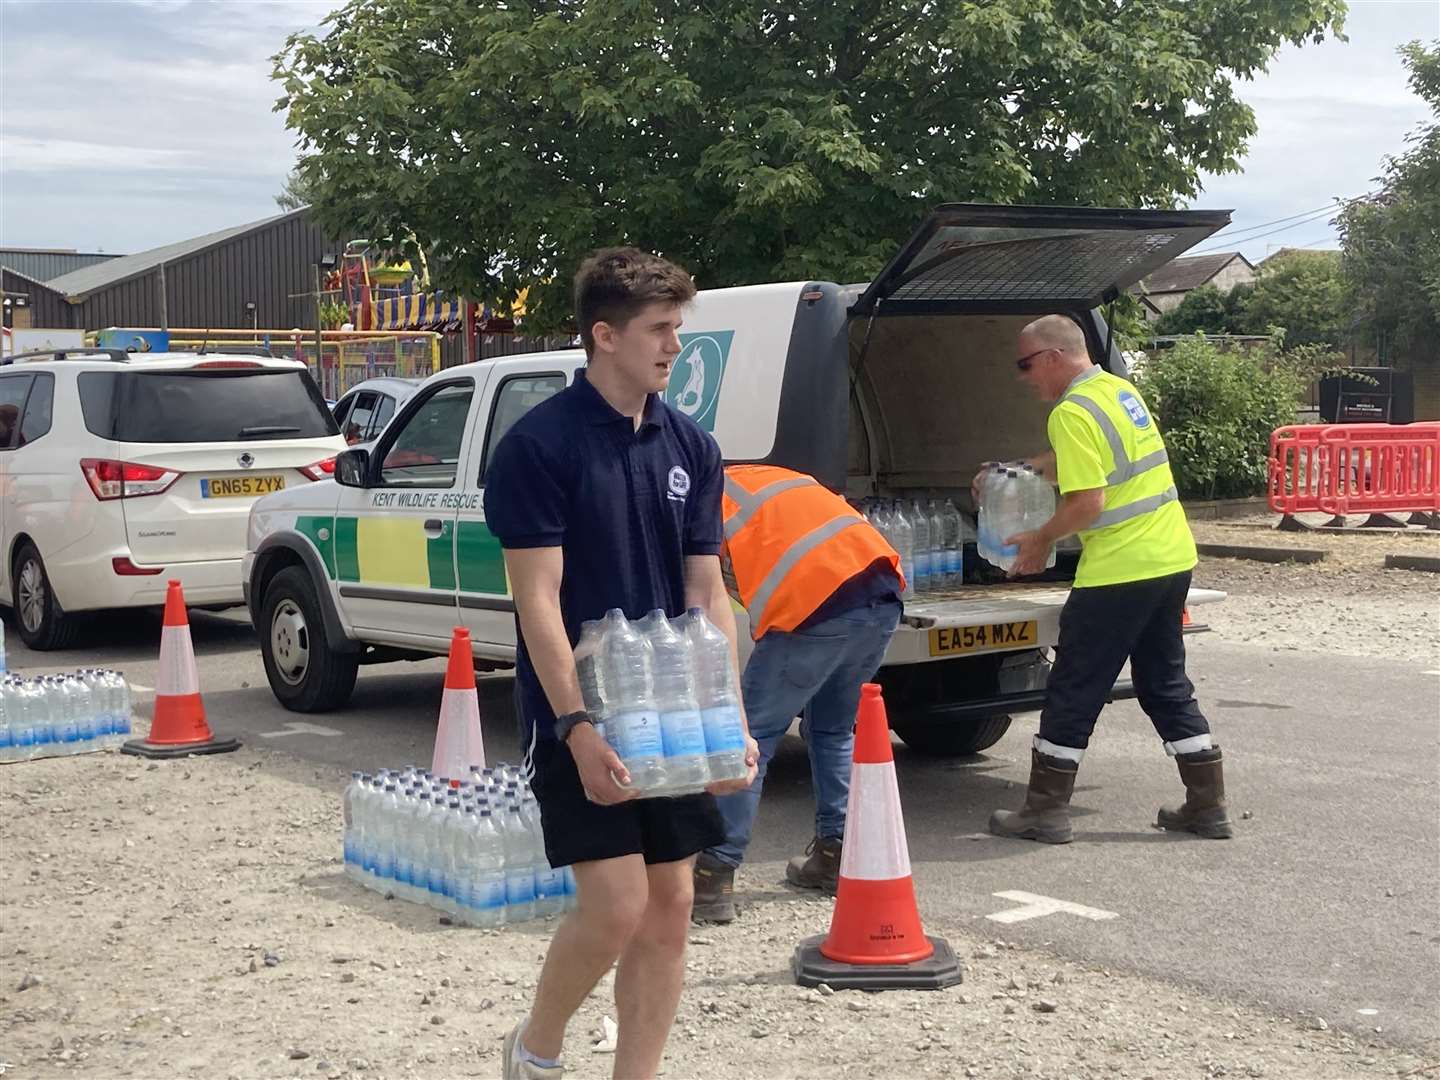 In July Southern Water handed out 350,000 litres of bottled supplies to customers following a burst main on the Kingsferry Bridge